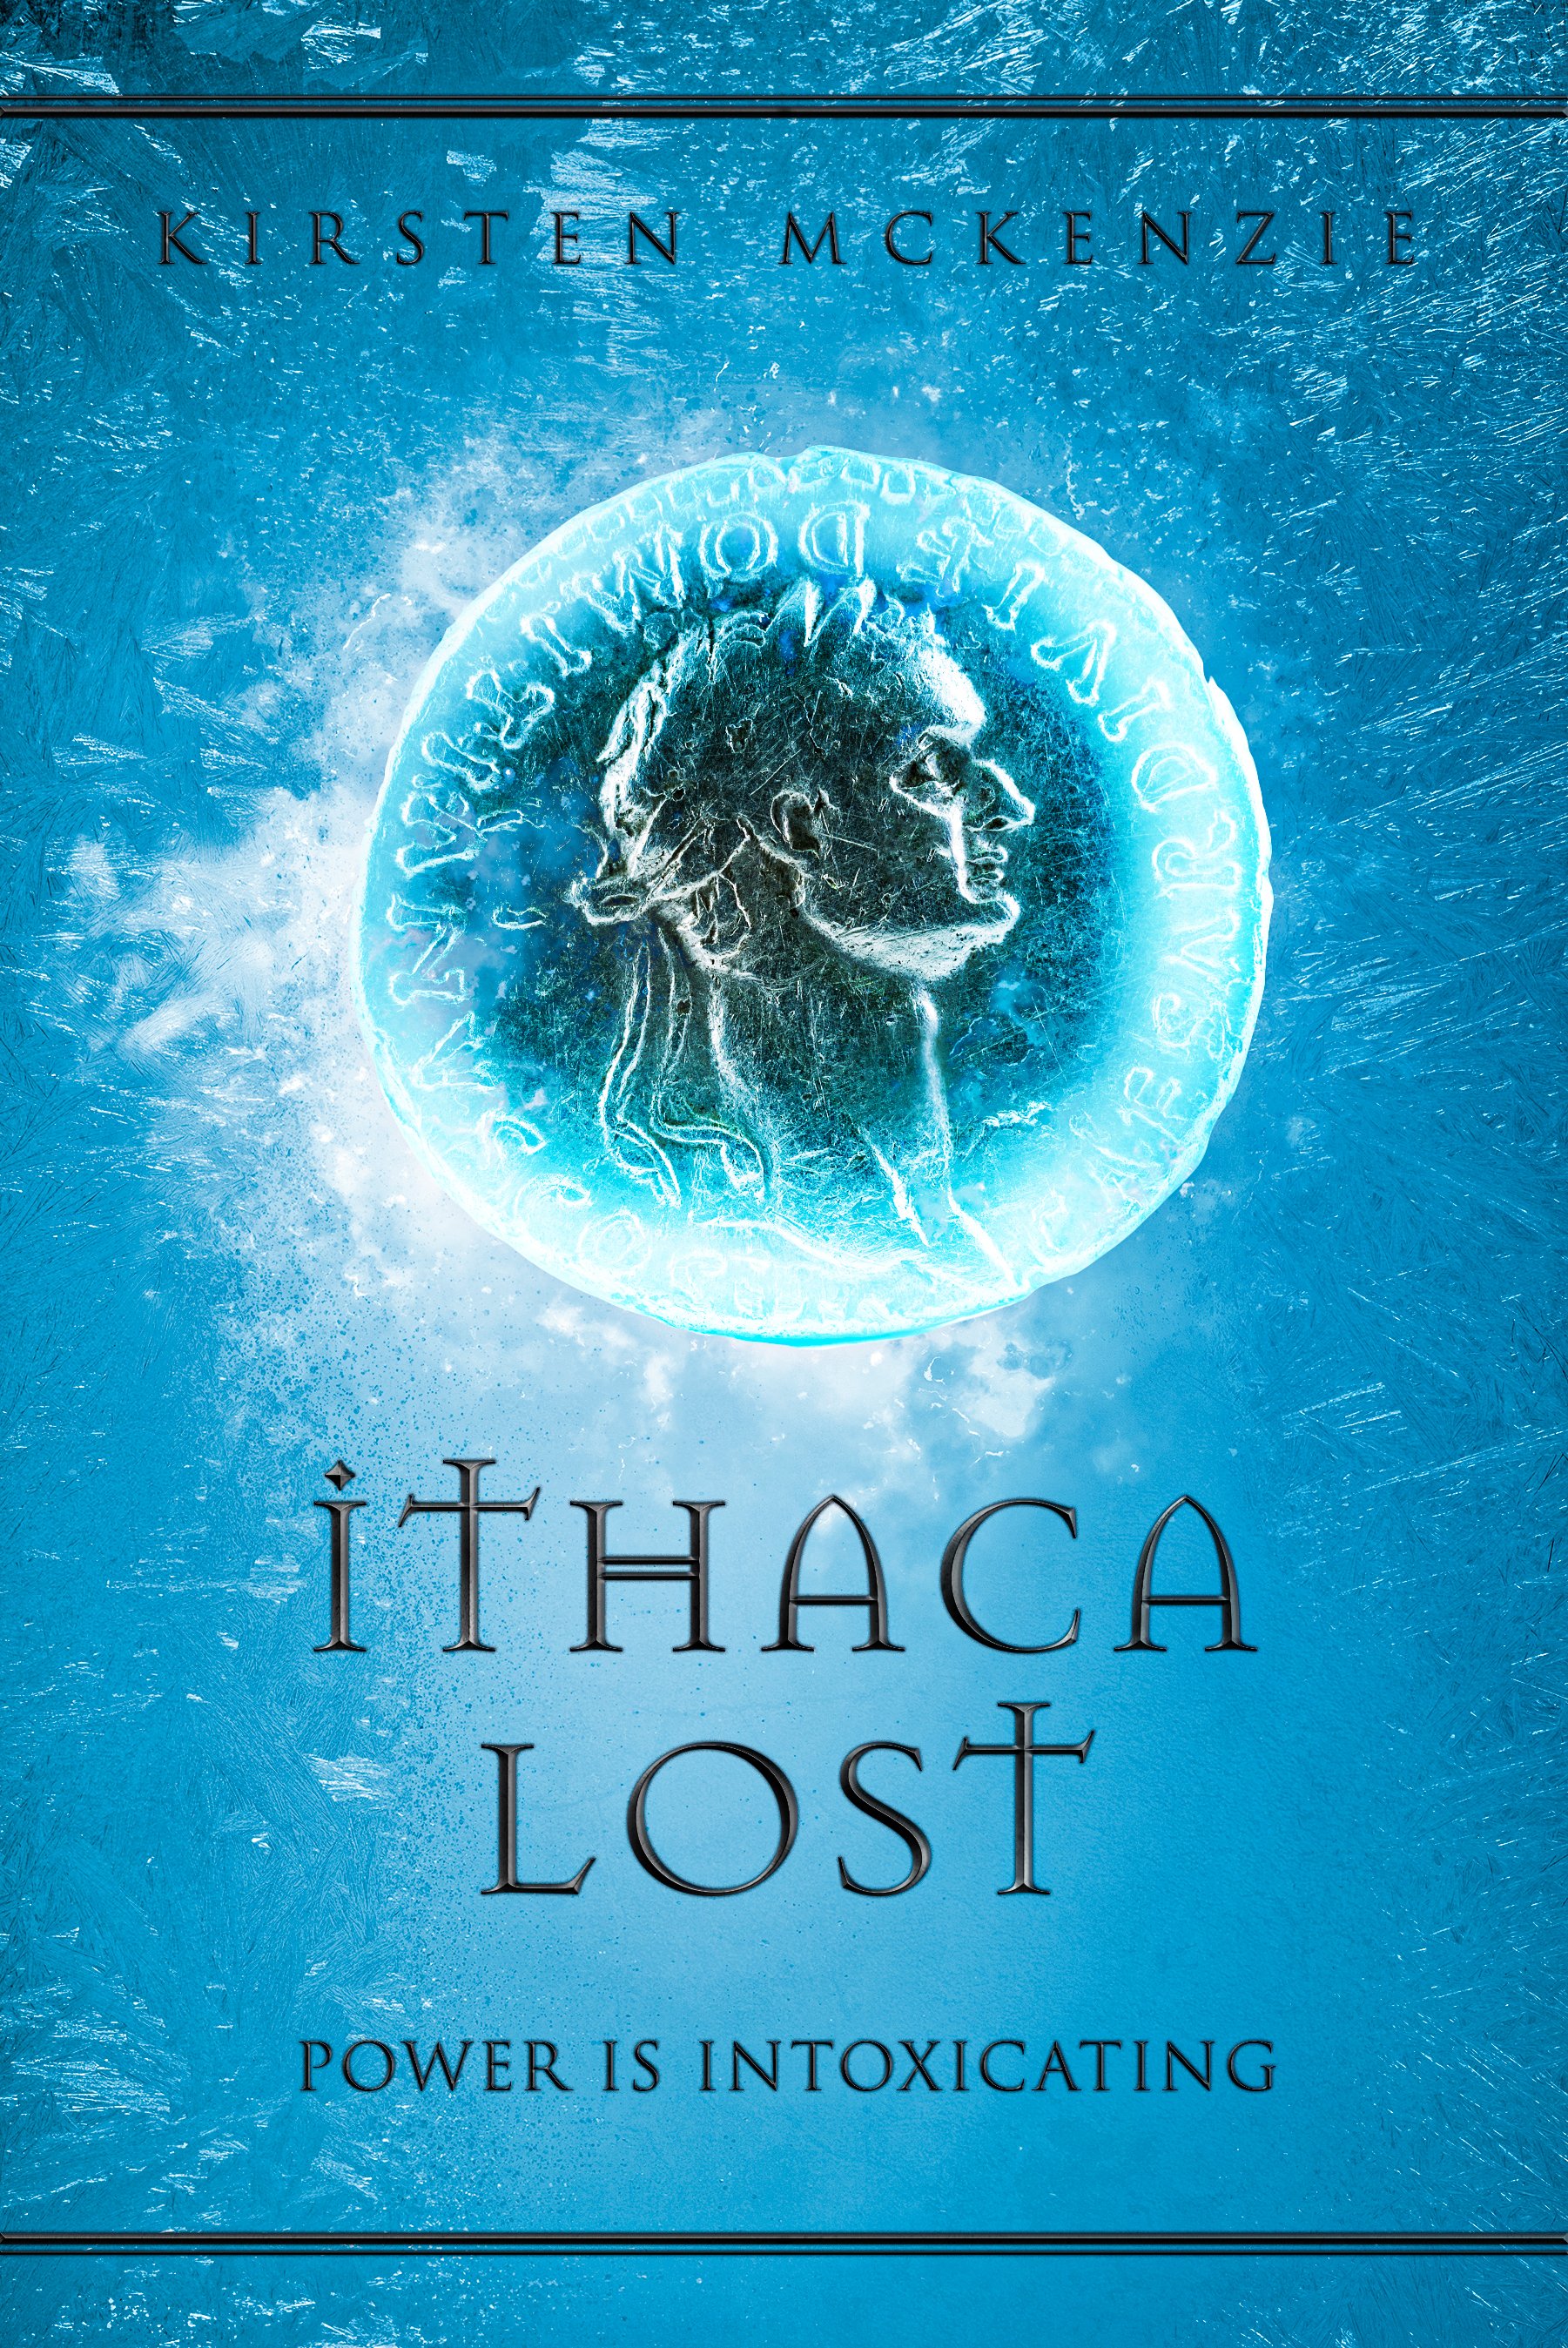 ITHACA LOST